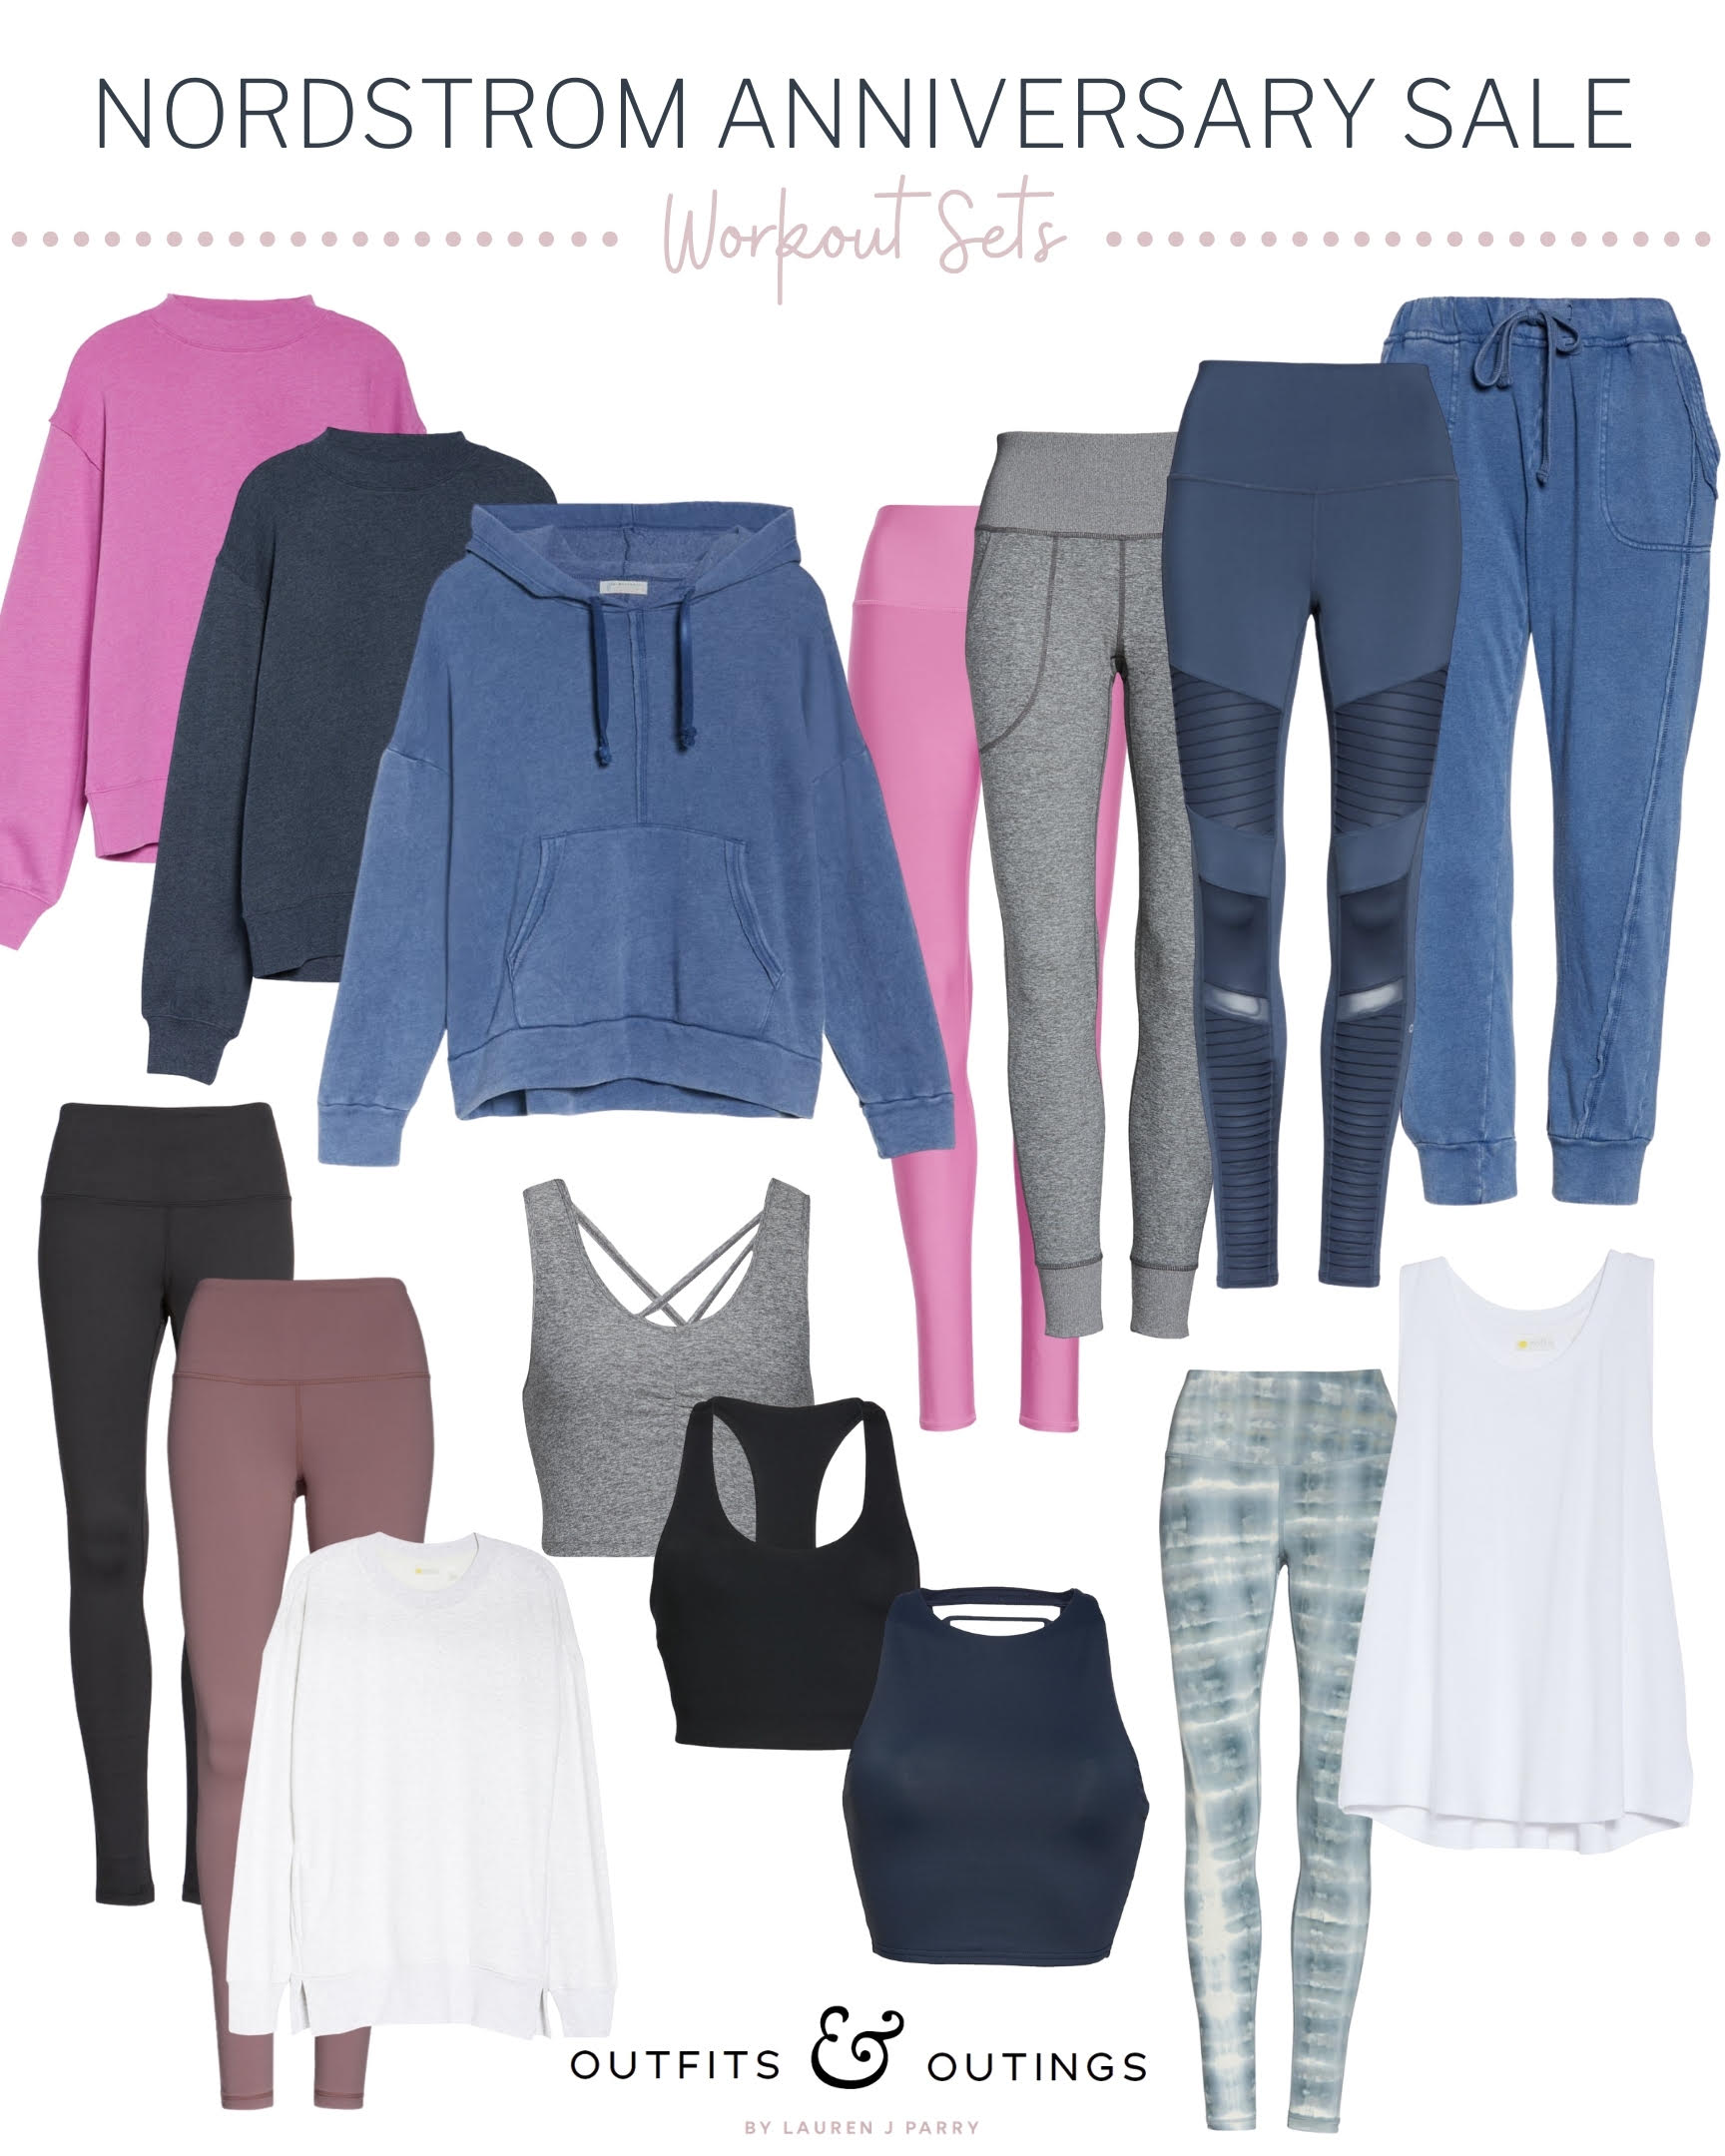 Nordstrom Anniversary Sale: Matching Workout Sets | Outfits & Outings